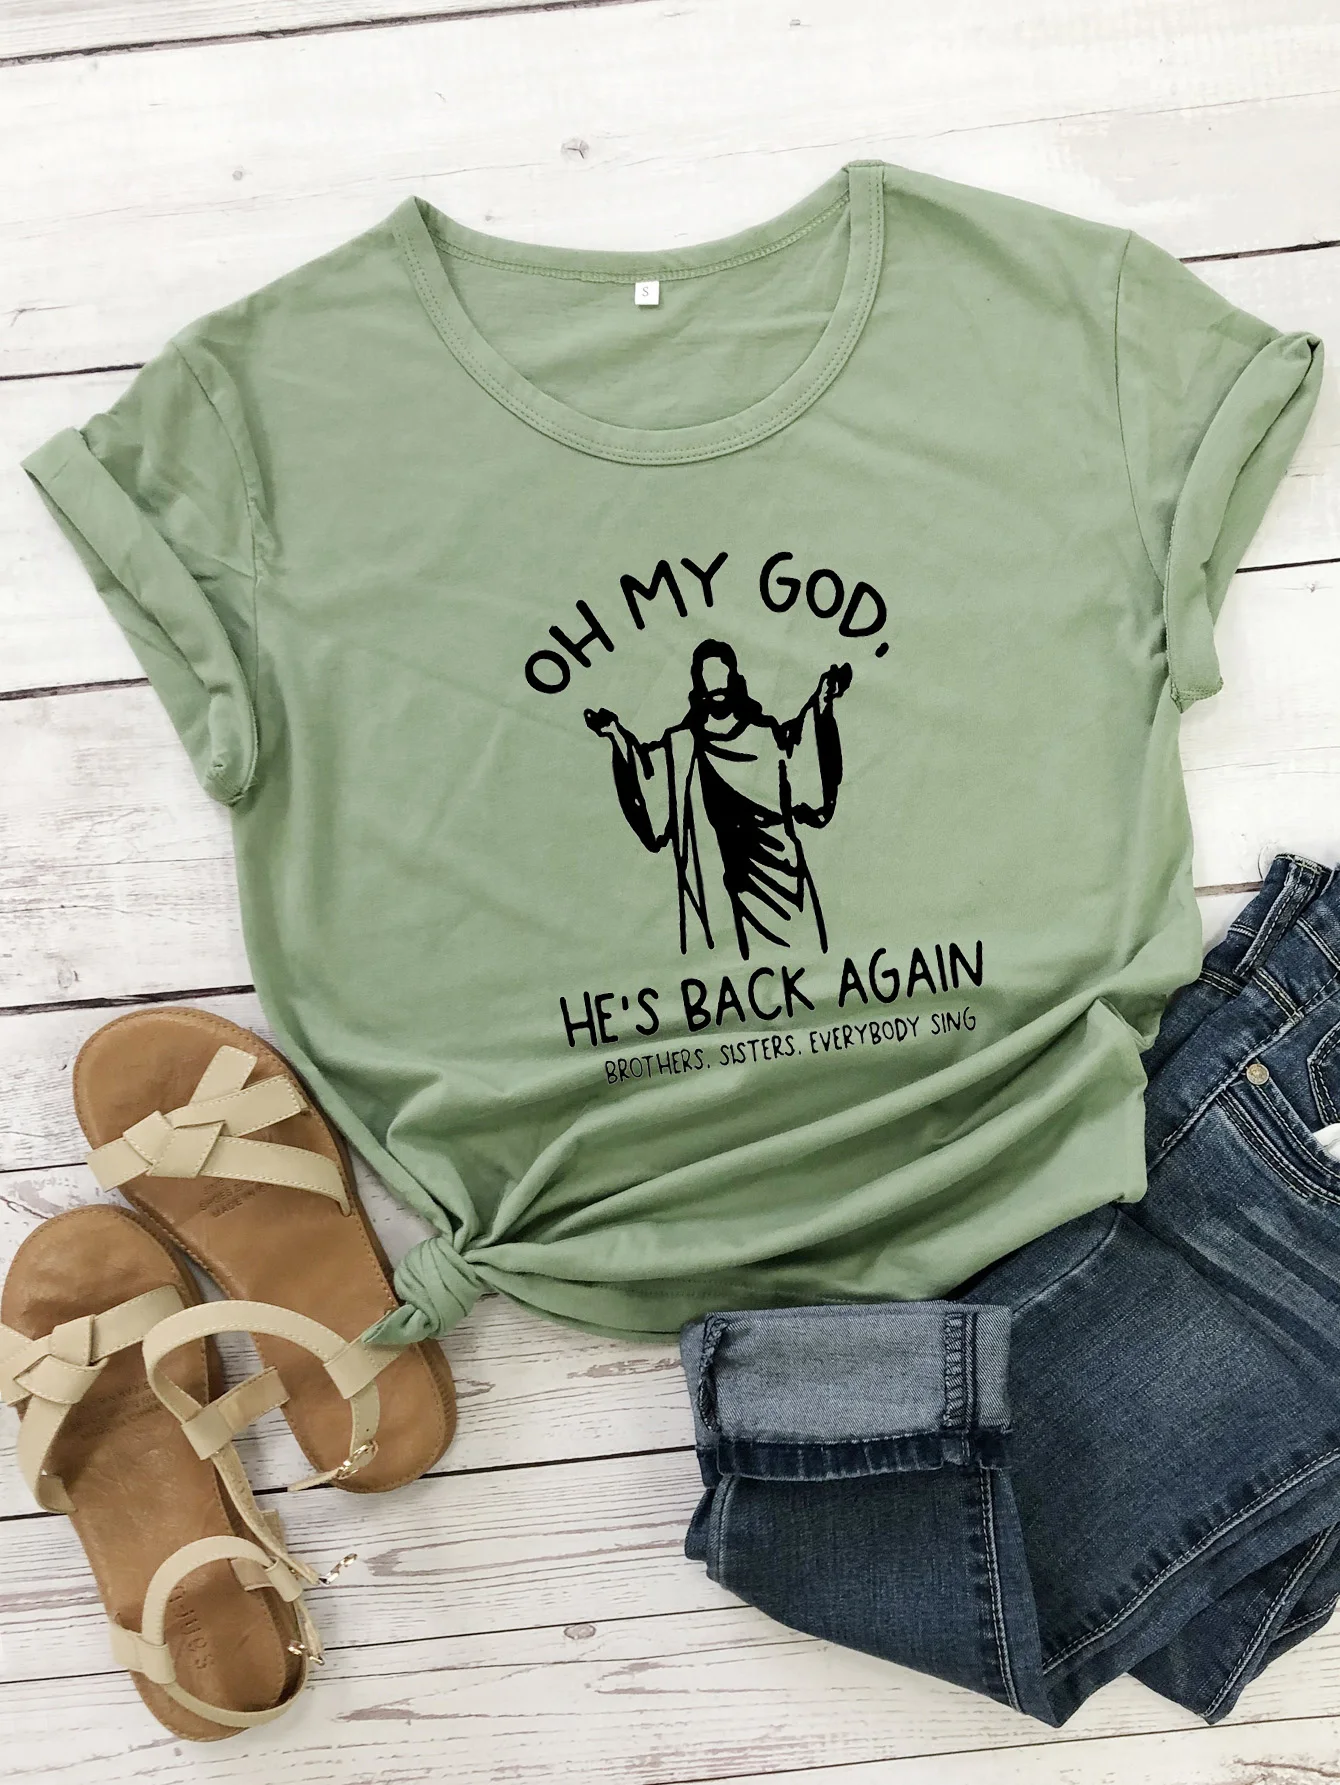 OH,My God T-Shirt Women Fashion Casual Short Sleeve V-Neck Letter Print Tops Blouse 